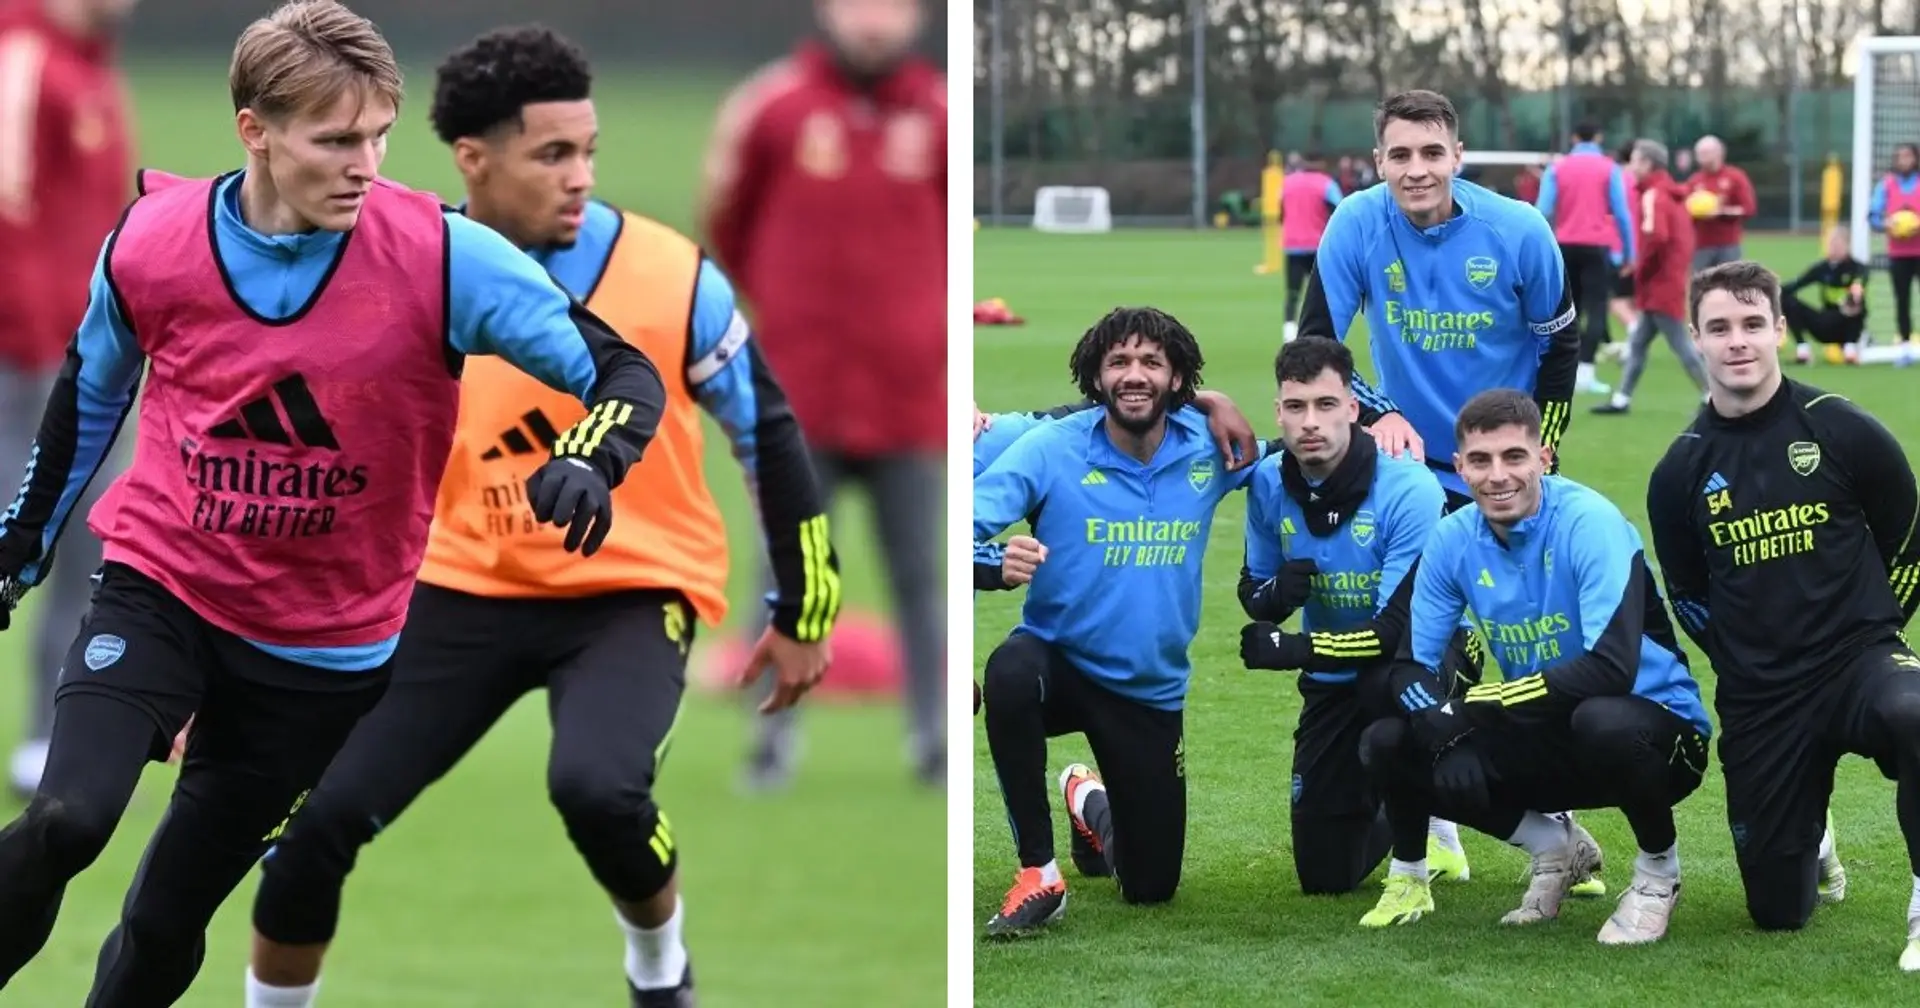 Two Arsenal players spotted wearing captain armbands in training - possible reason revealed